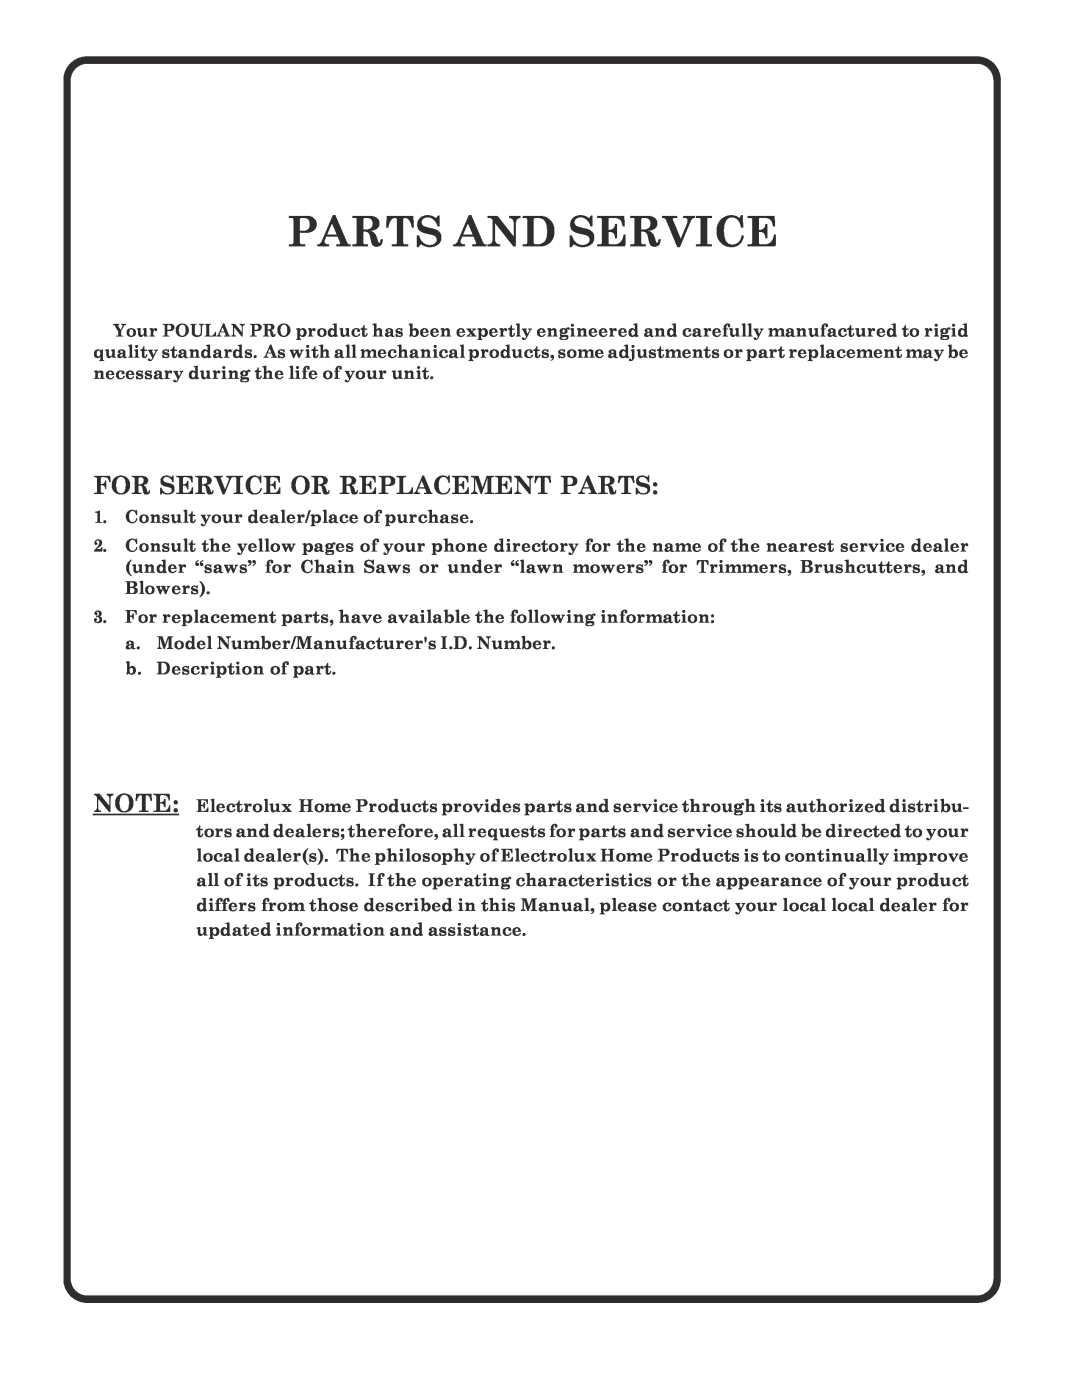 Poulan 183050 owner manual Parts And Service, For Service Or Replacement Parts 